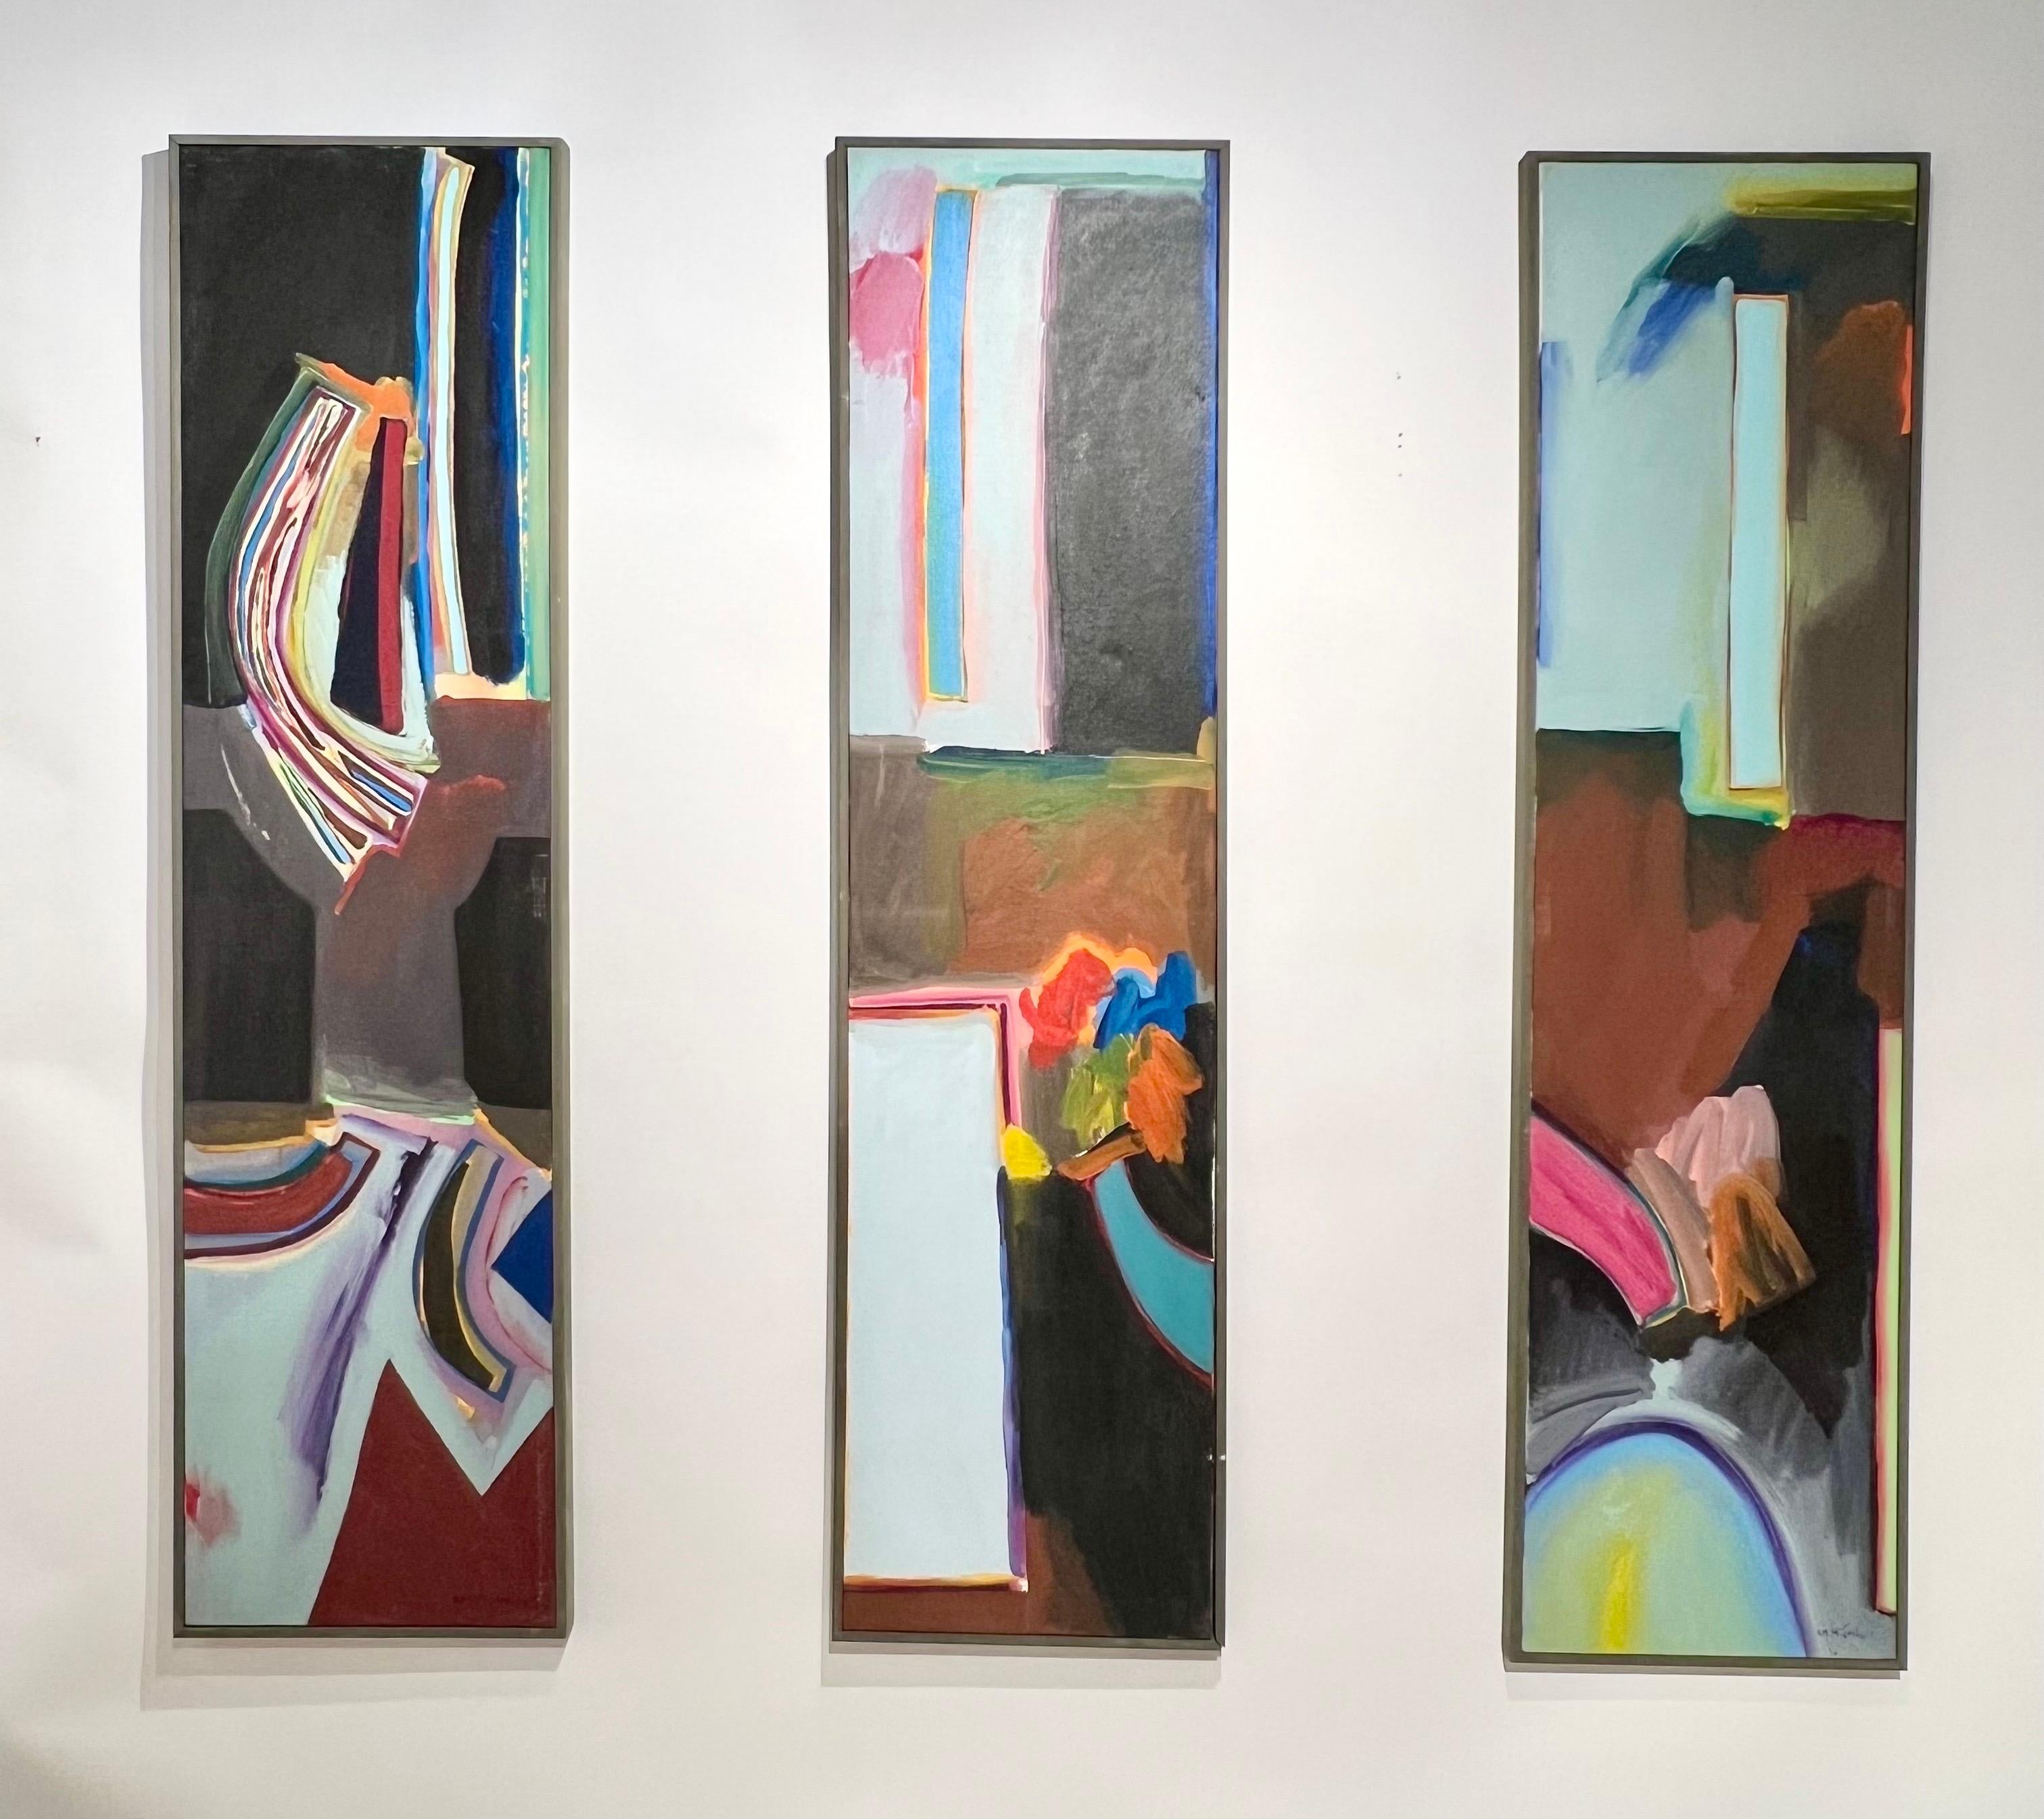 Incredible triptych abstract oil on canvas by American artist, Harley Francis c1979. These can be arranged in any order, all three pieces are signed. 

Francis (1940-2017) was an incredibly prolific artist, painter, set designer, and ceramicist.